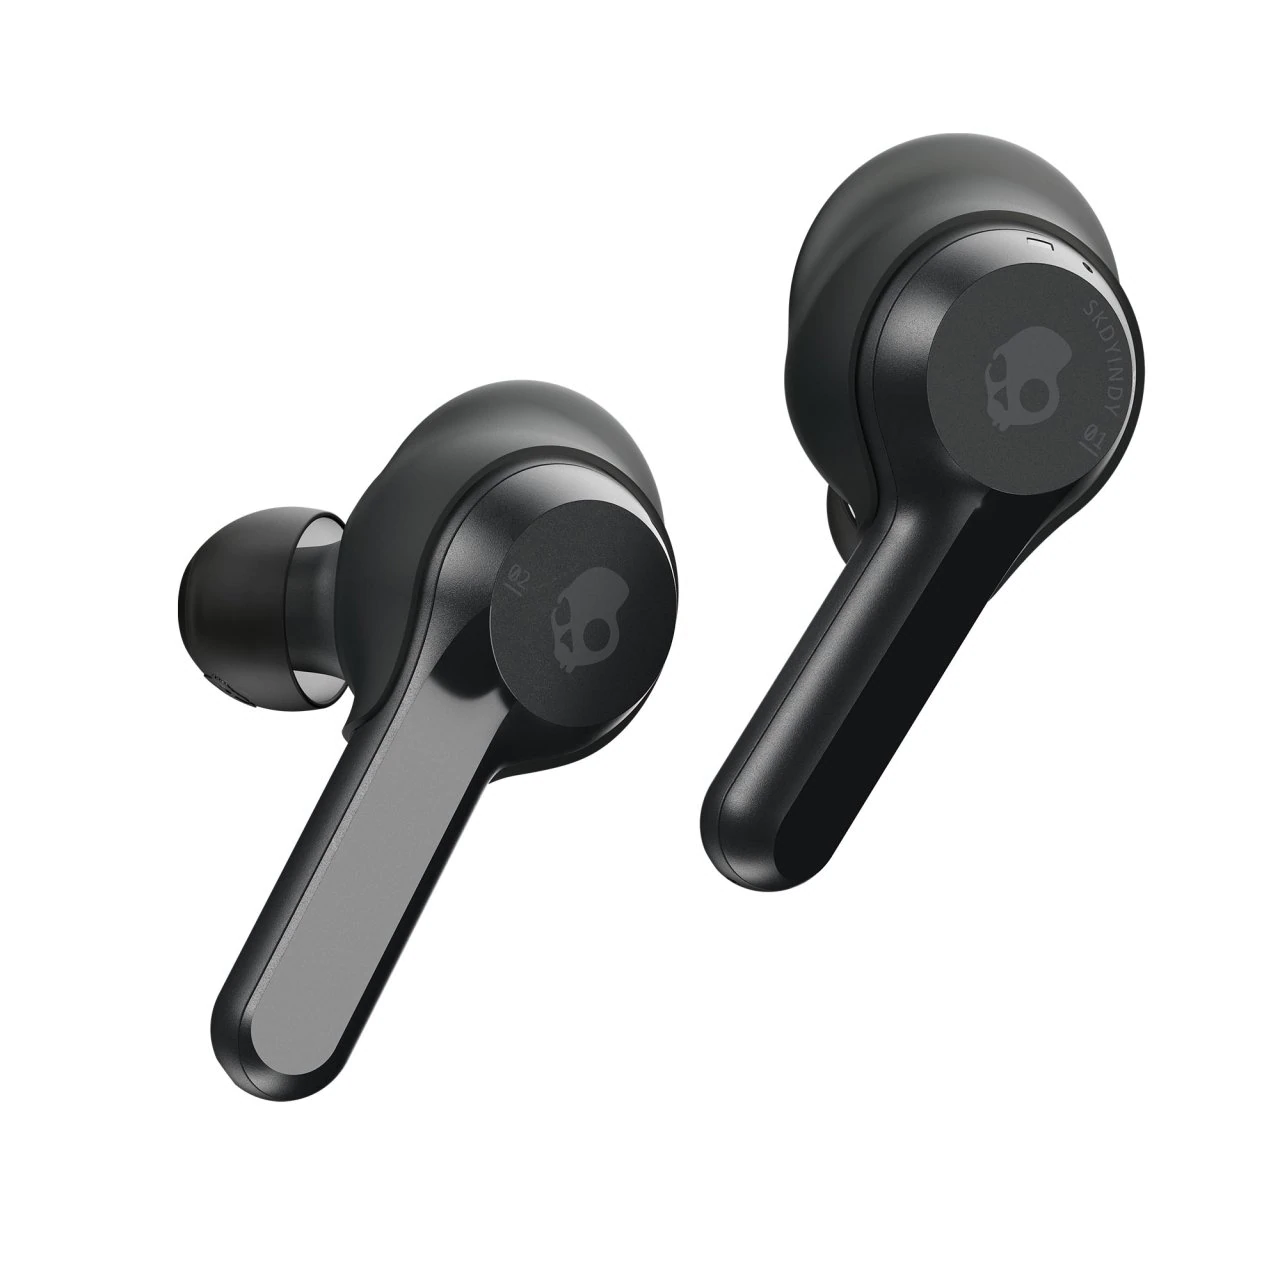 Tai nghe True Wireless Skullcandy Indy thiết kế cao cấp